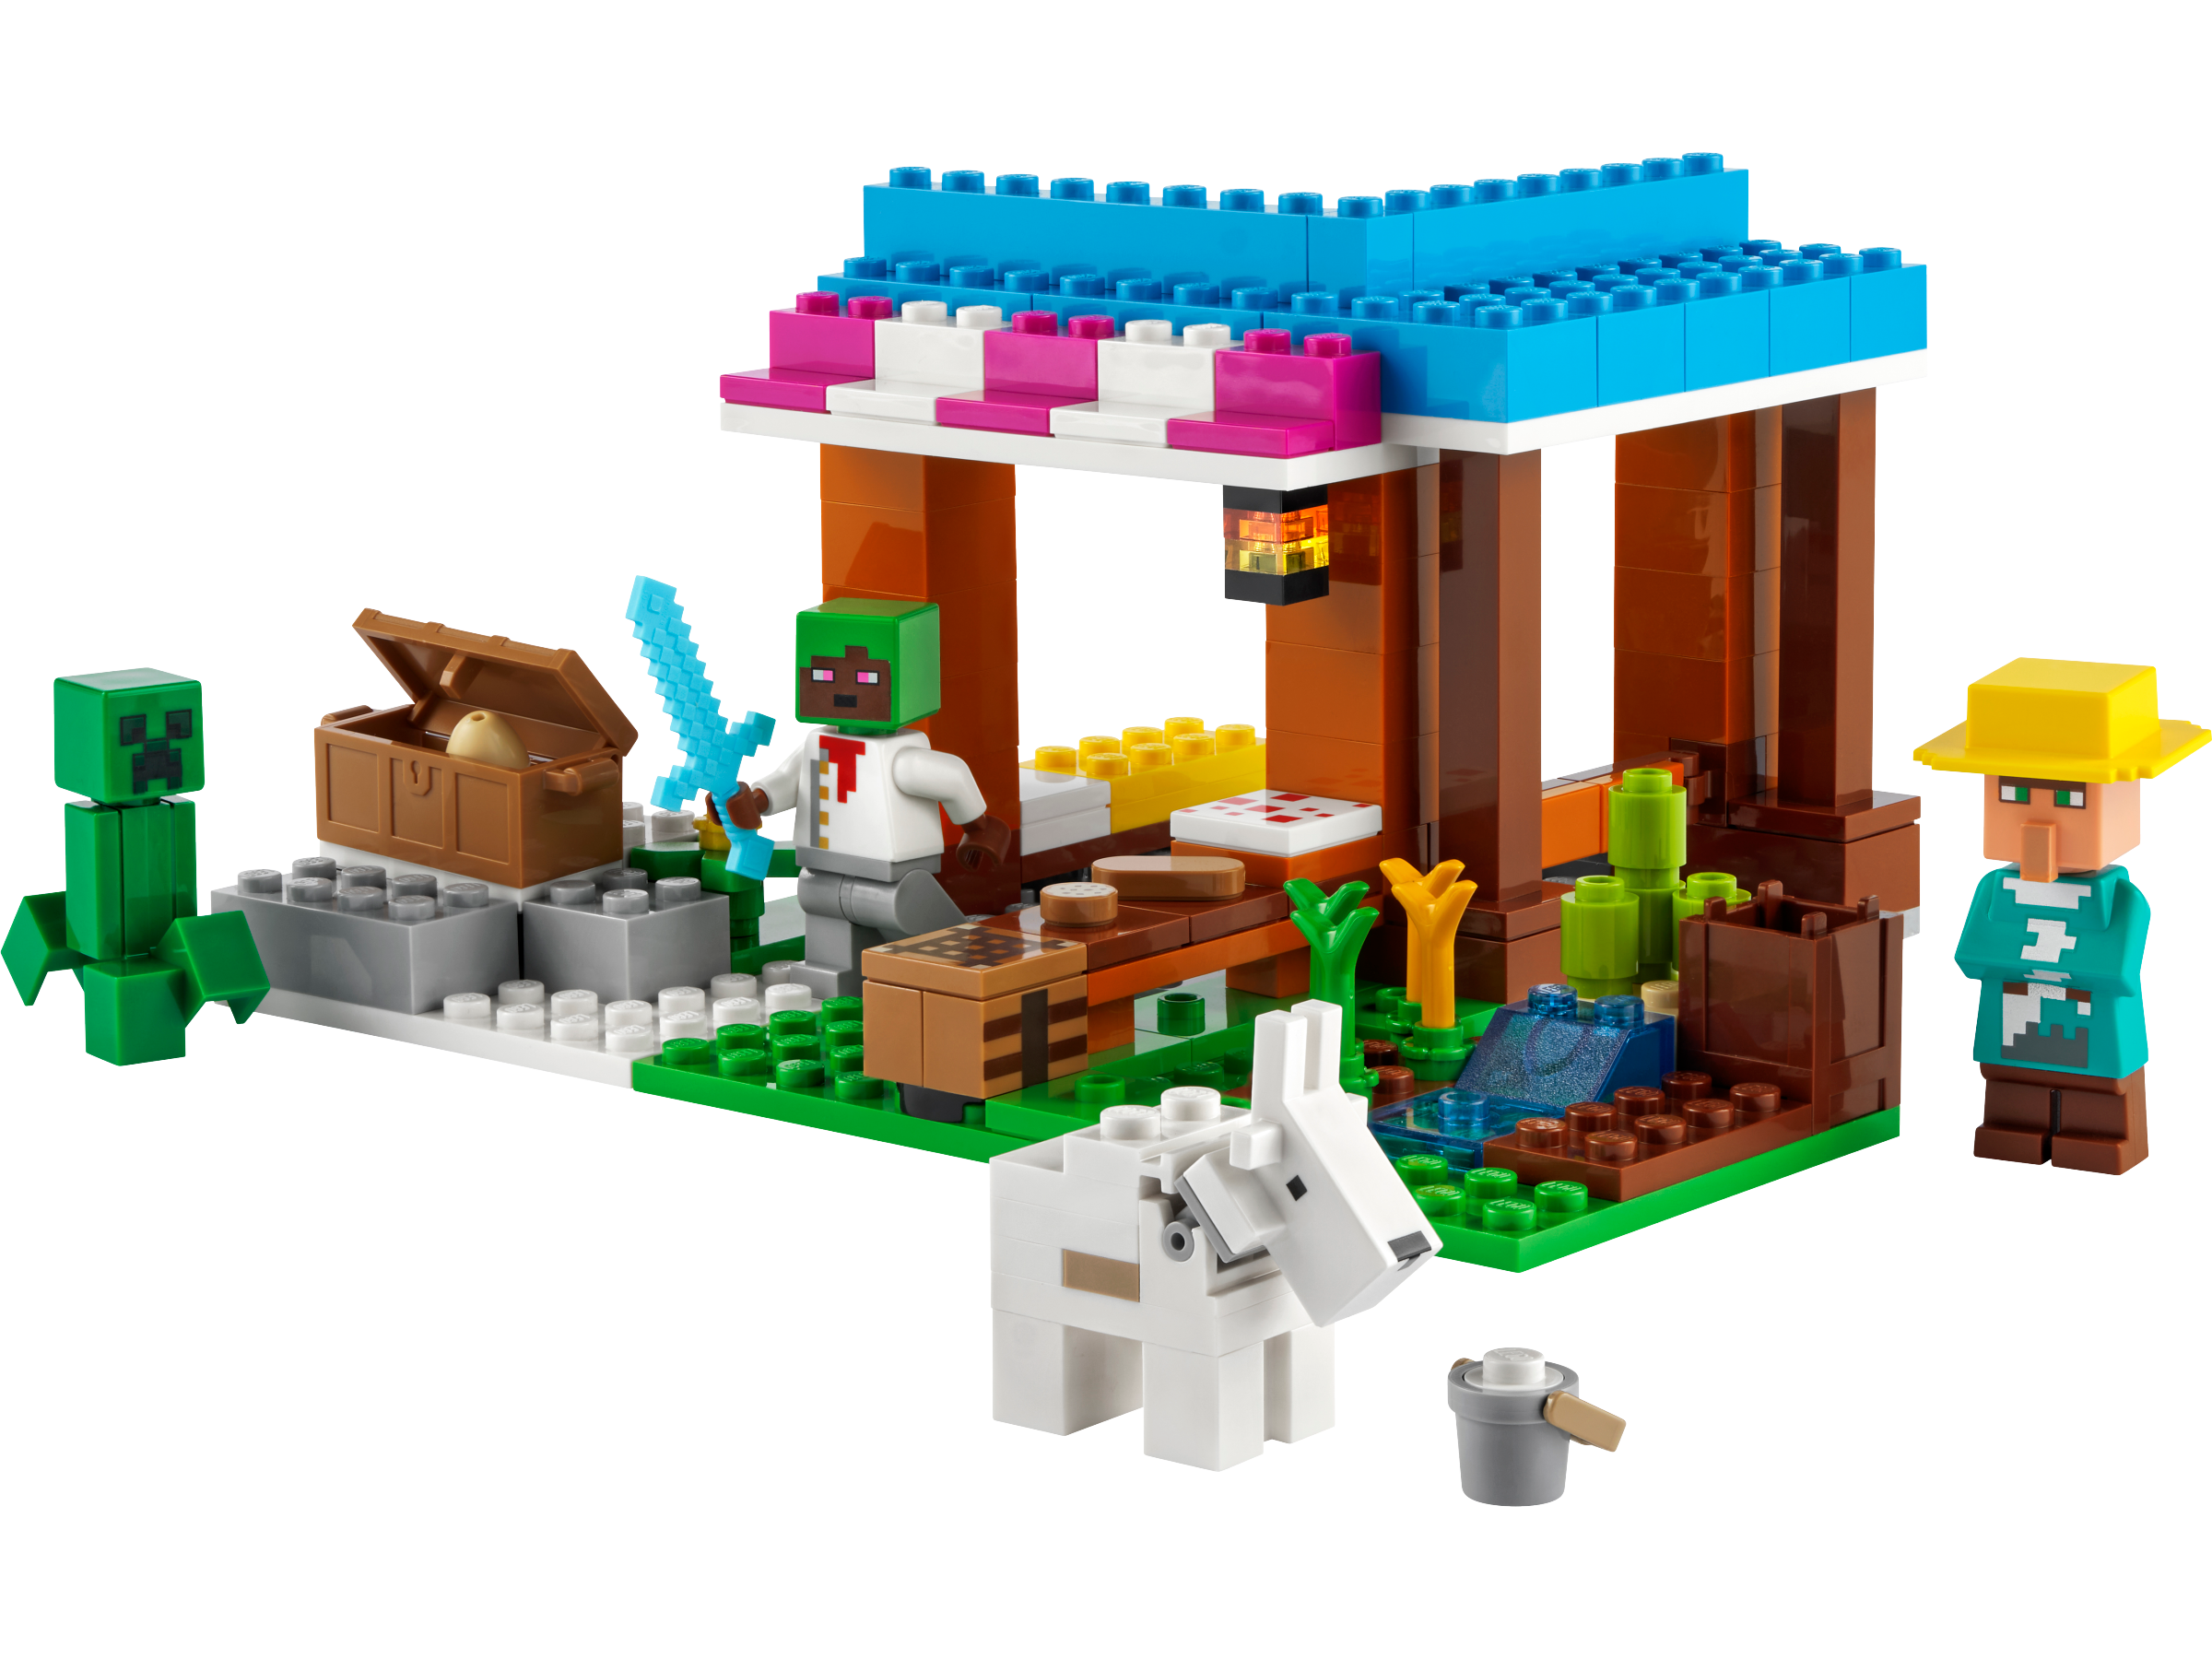 The Bakery 21184 | Minecraft® Buy online at the Official LEGO® Shop US